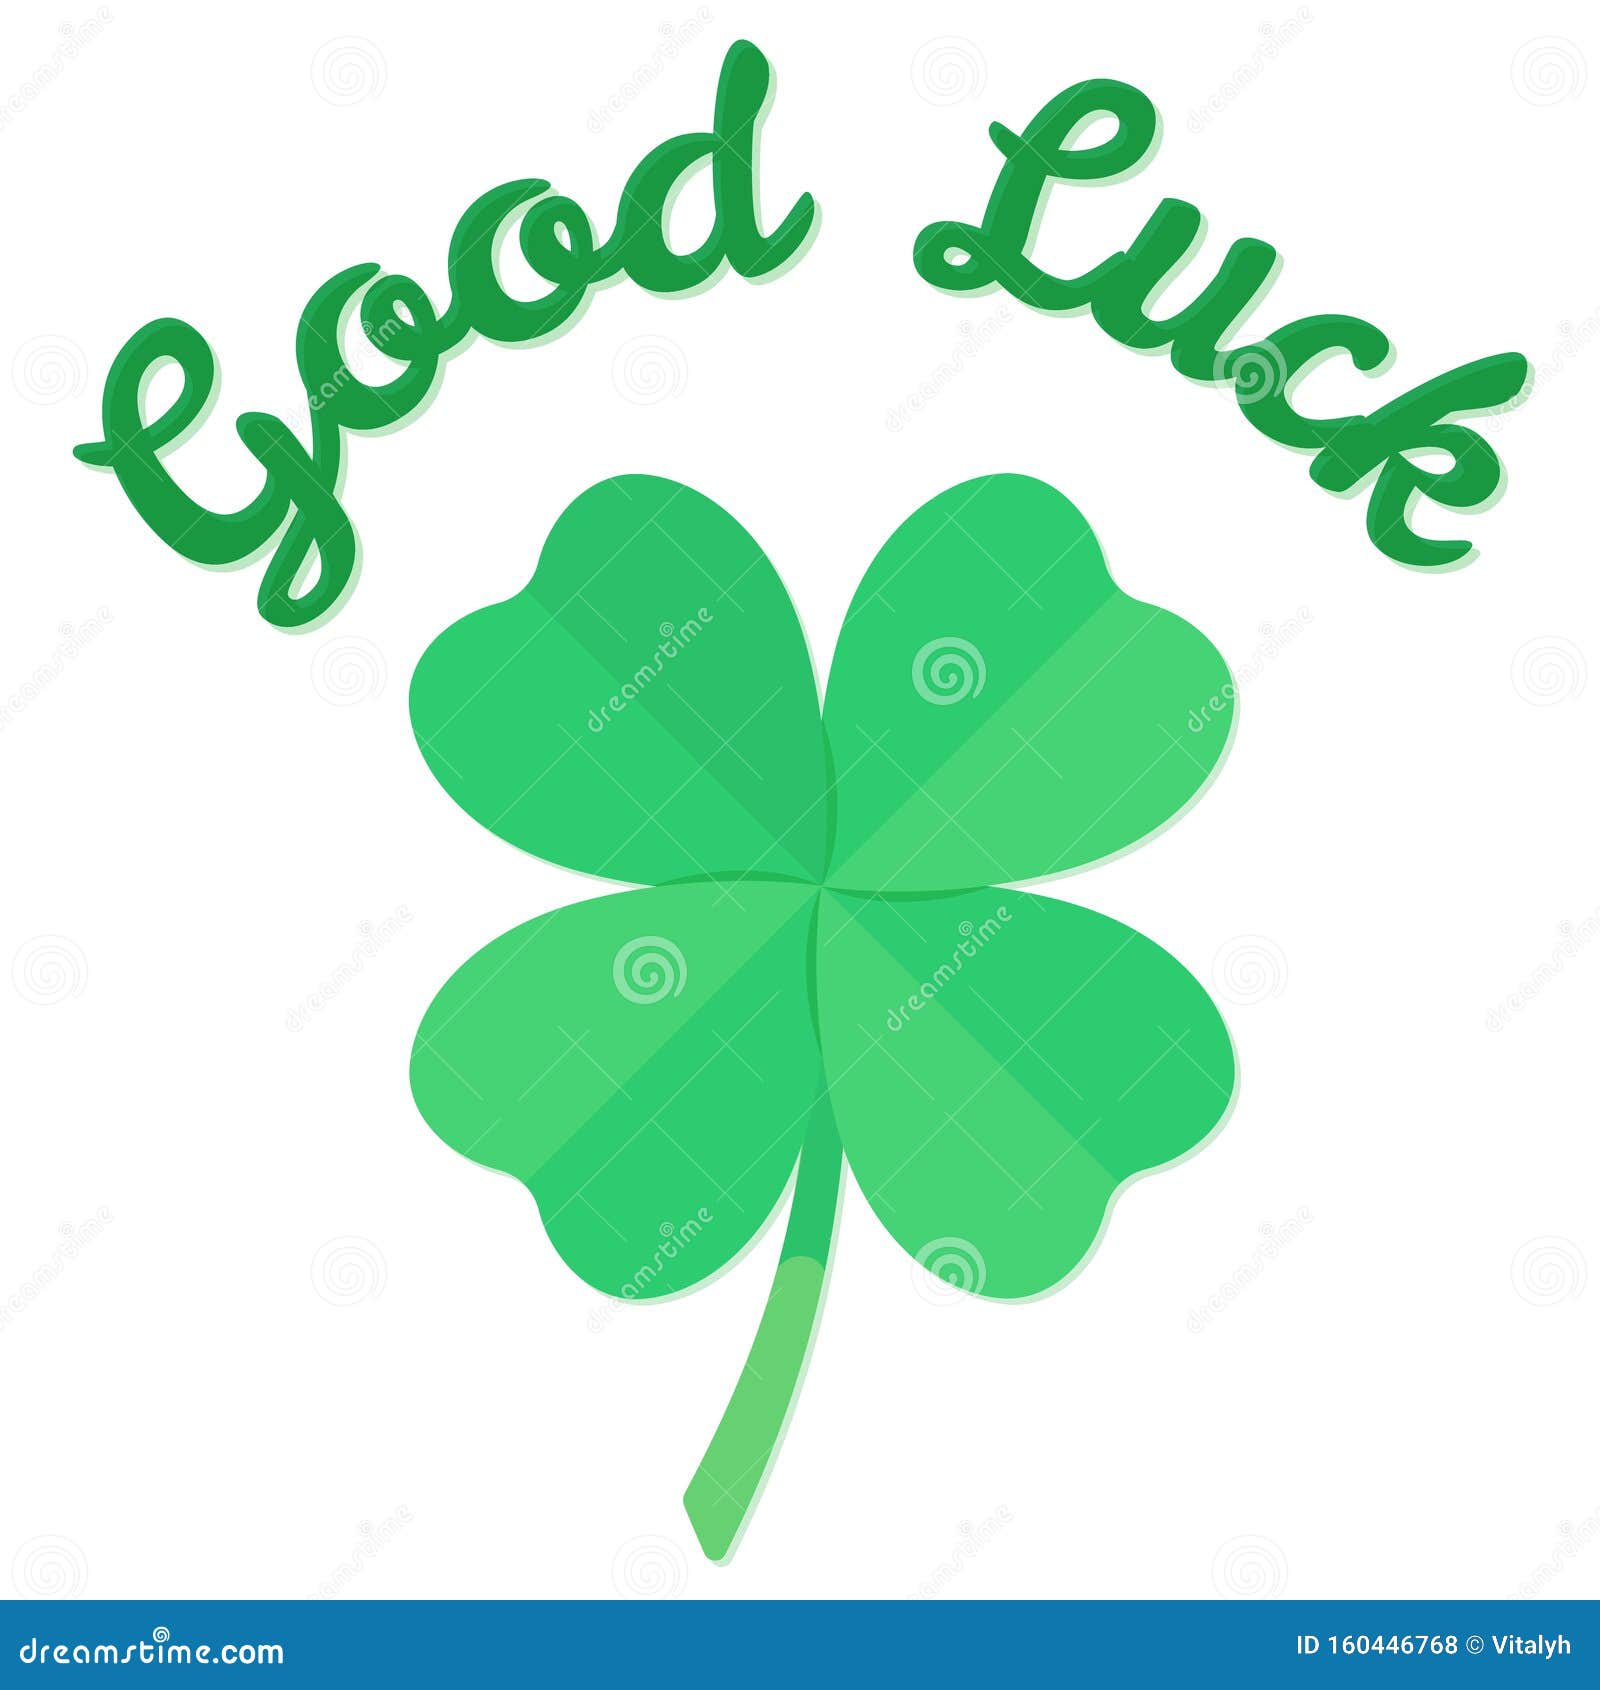 Four Leaf Green Lucky Clover with Text Good Luck Flat Vector Illustration  Stock Vector - Illustration of celtic, patrick: 160446768